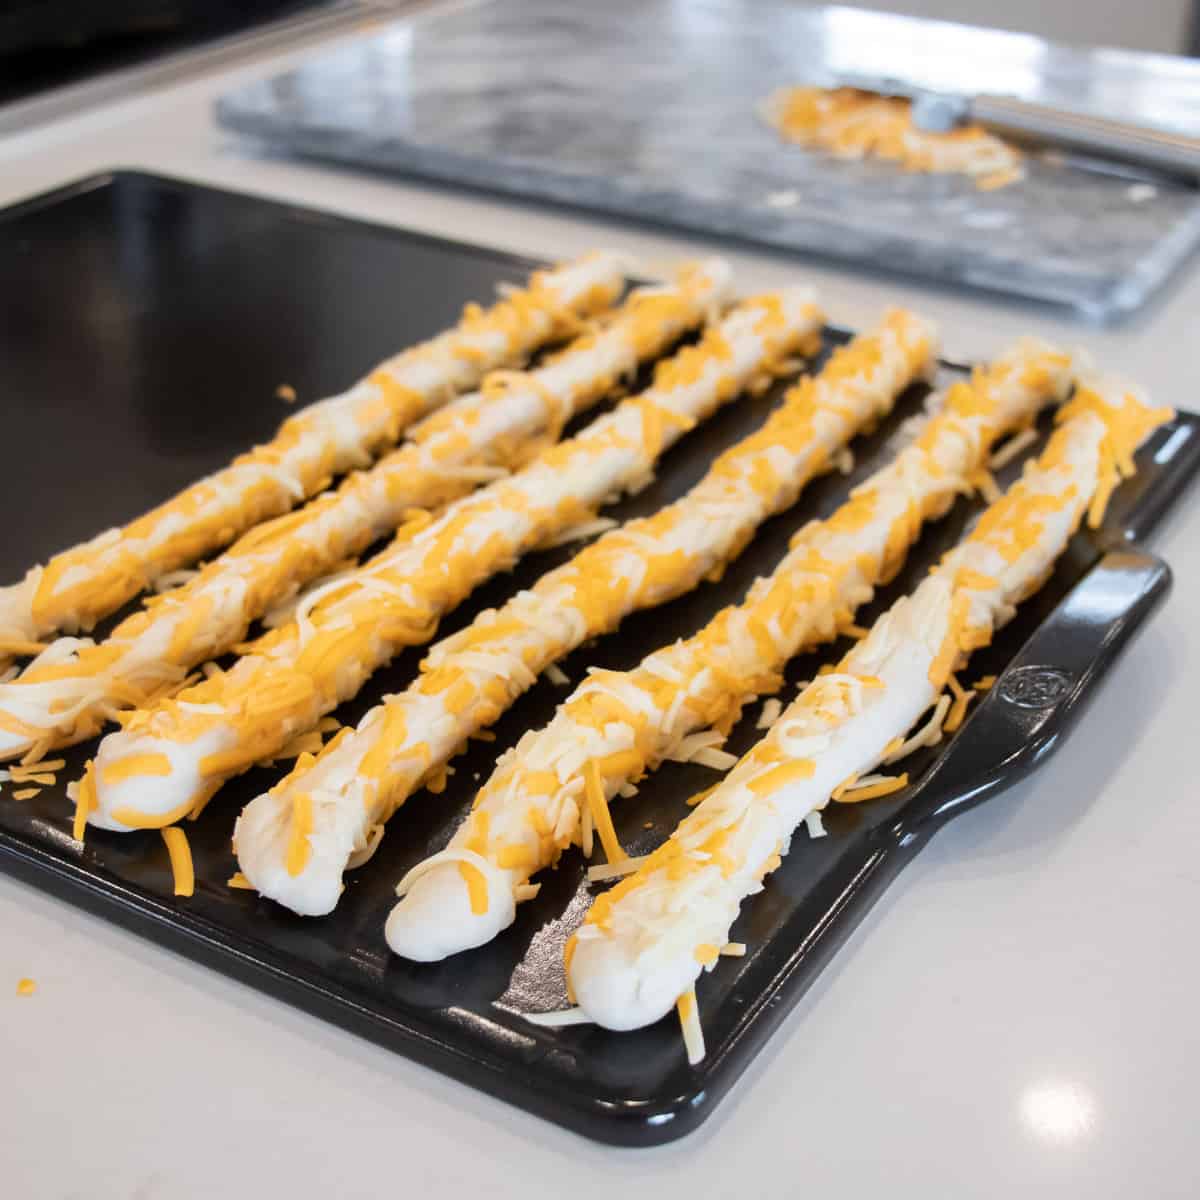 The rolled breadsticks resting on a baking sheet before they go in the oven.